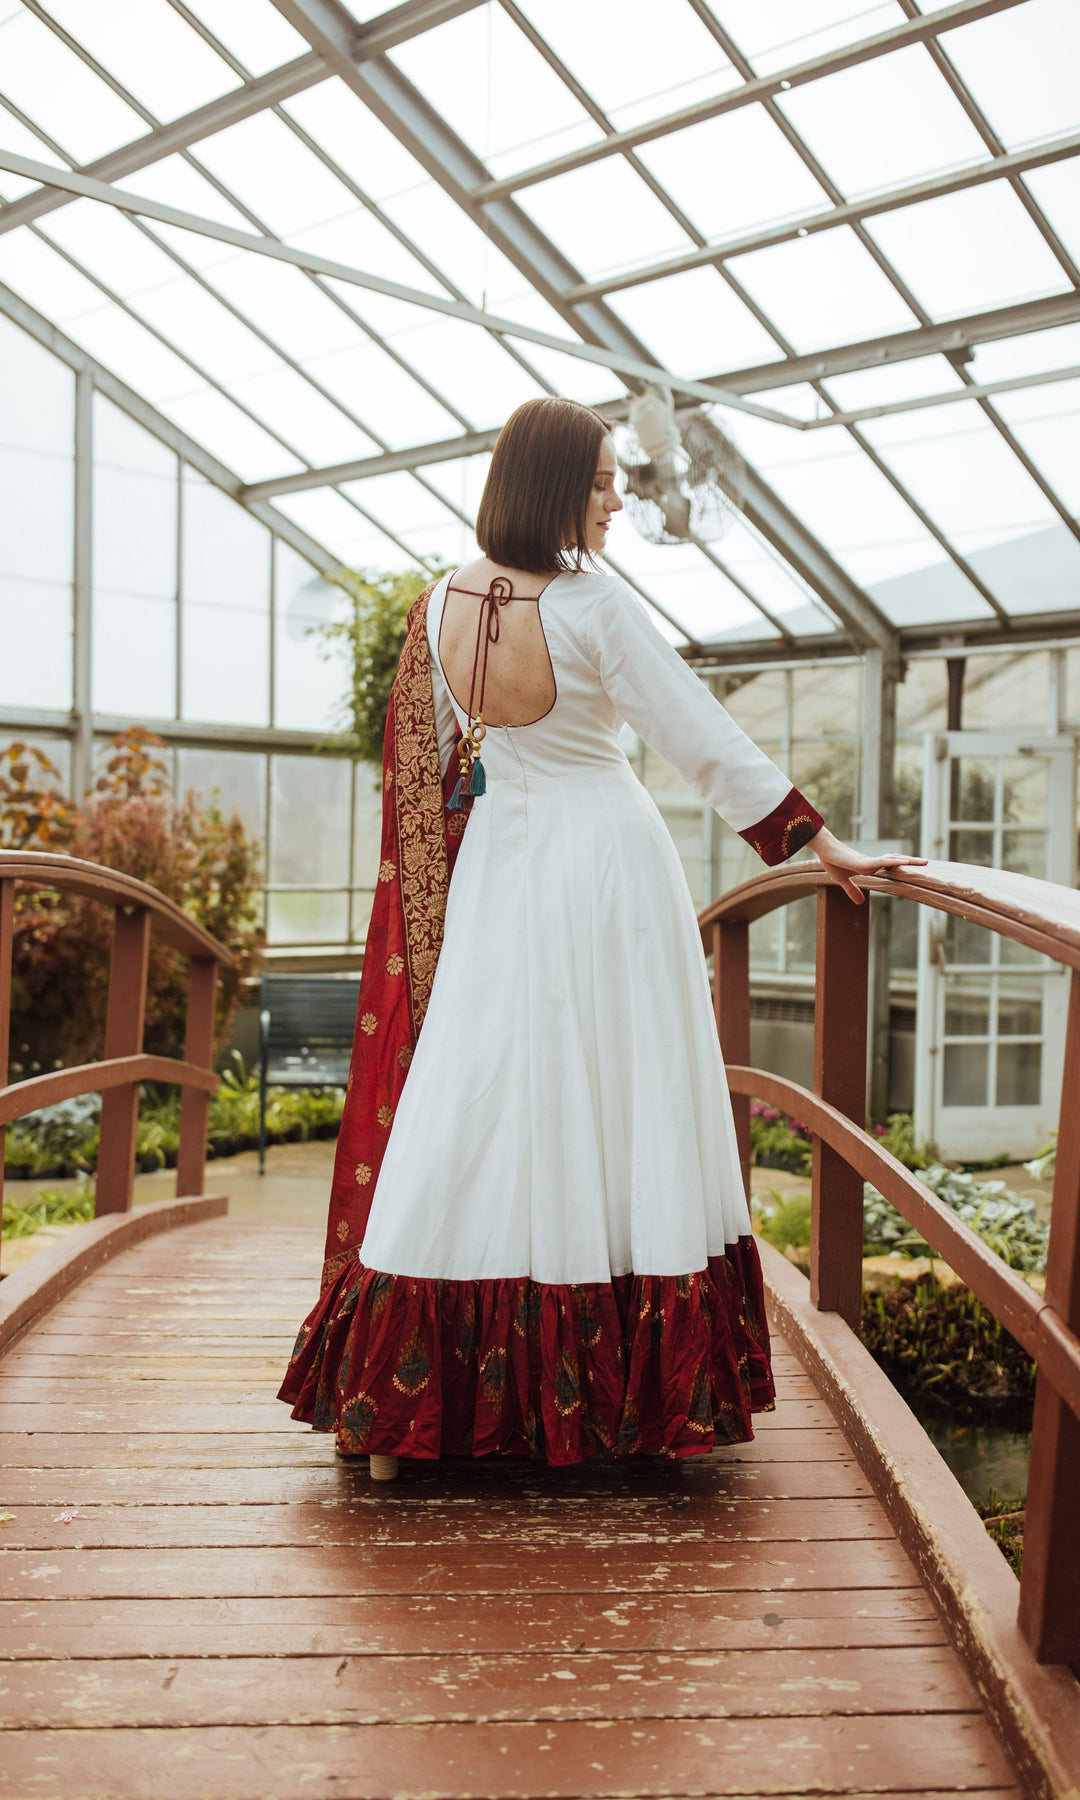 Buy Ivory White Lehenga Choli In Raw Silk With Colorful Resham And Cut Dana  Embroidered Summertime Flowers And Heritage Motifs Online - Kalki Fashion